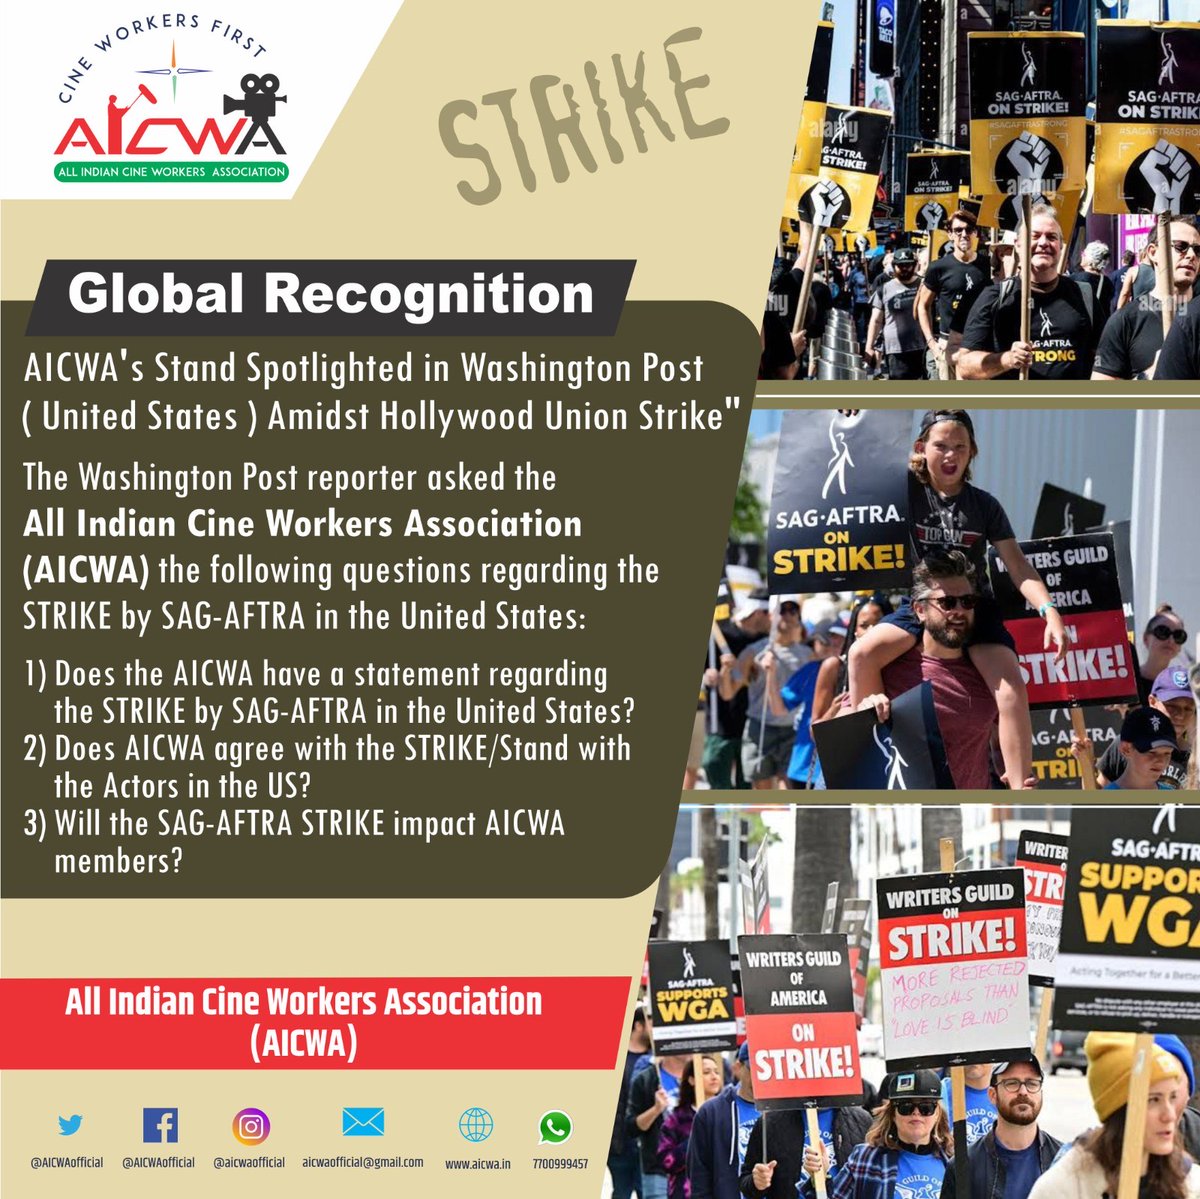 'AICWA supported the strike of Hollywood's SAG-AFTRA Union.'

The All Indian Cine Workers Association  supported the Hollywood SAG-AFTRA Union during the STRIKE | During the STRIKE, The Washington Post ( Media ) asked AICWA how much they agreed with the STRIKE | AICWA responded